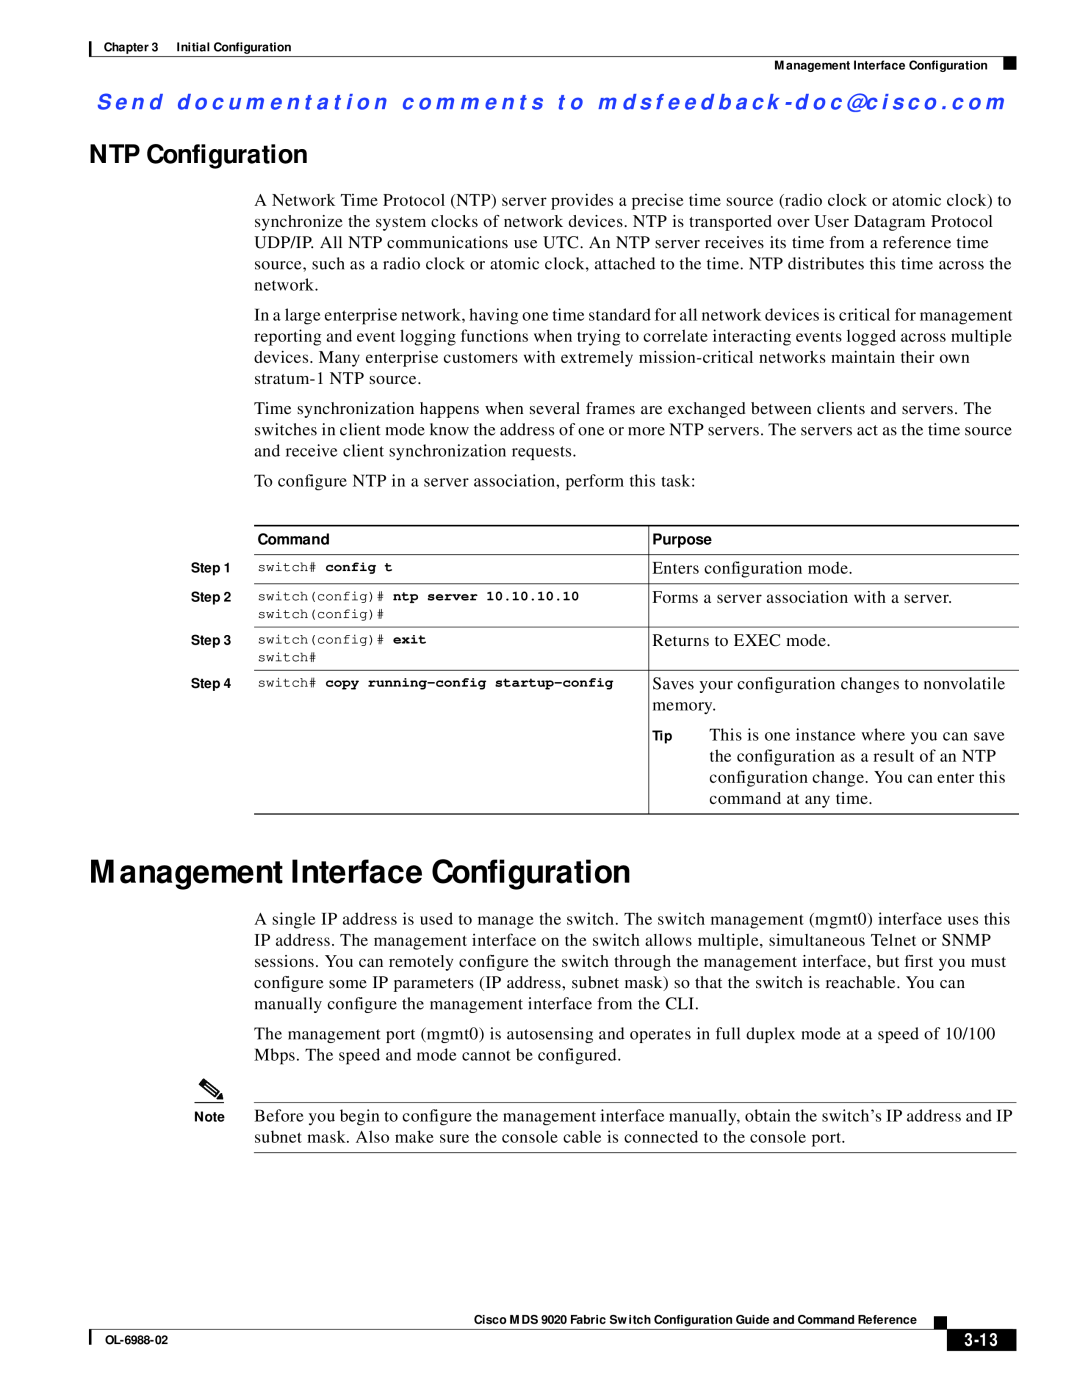 Cisco Systems MDS 9020 manual Management Interface Configuration, NTP Configuration, 3-13, Command, Purpose 